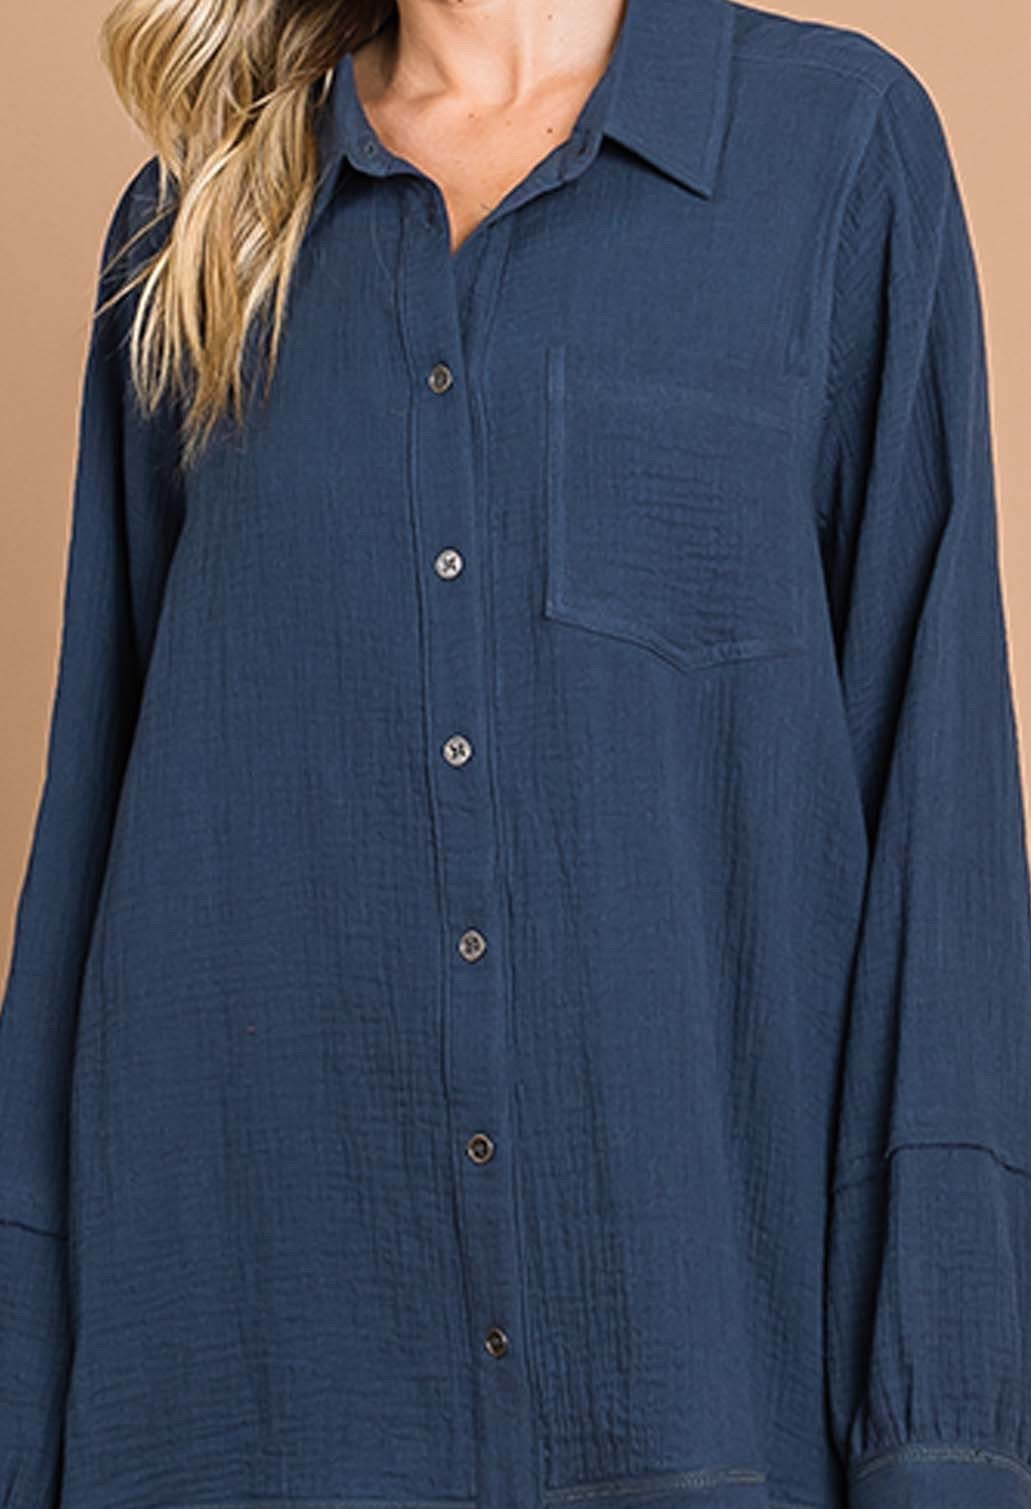 Cotton Bleu Reign It In Top - Dusty Blue, long sleeve, button down, collared, front pocket, gauze material, curvy